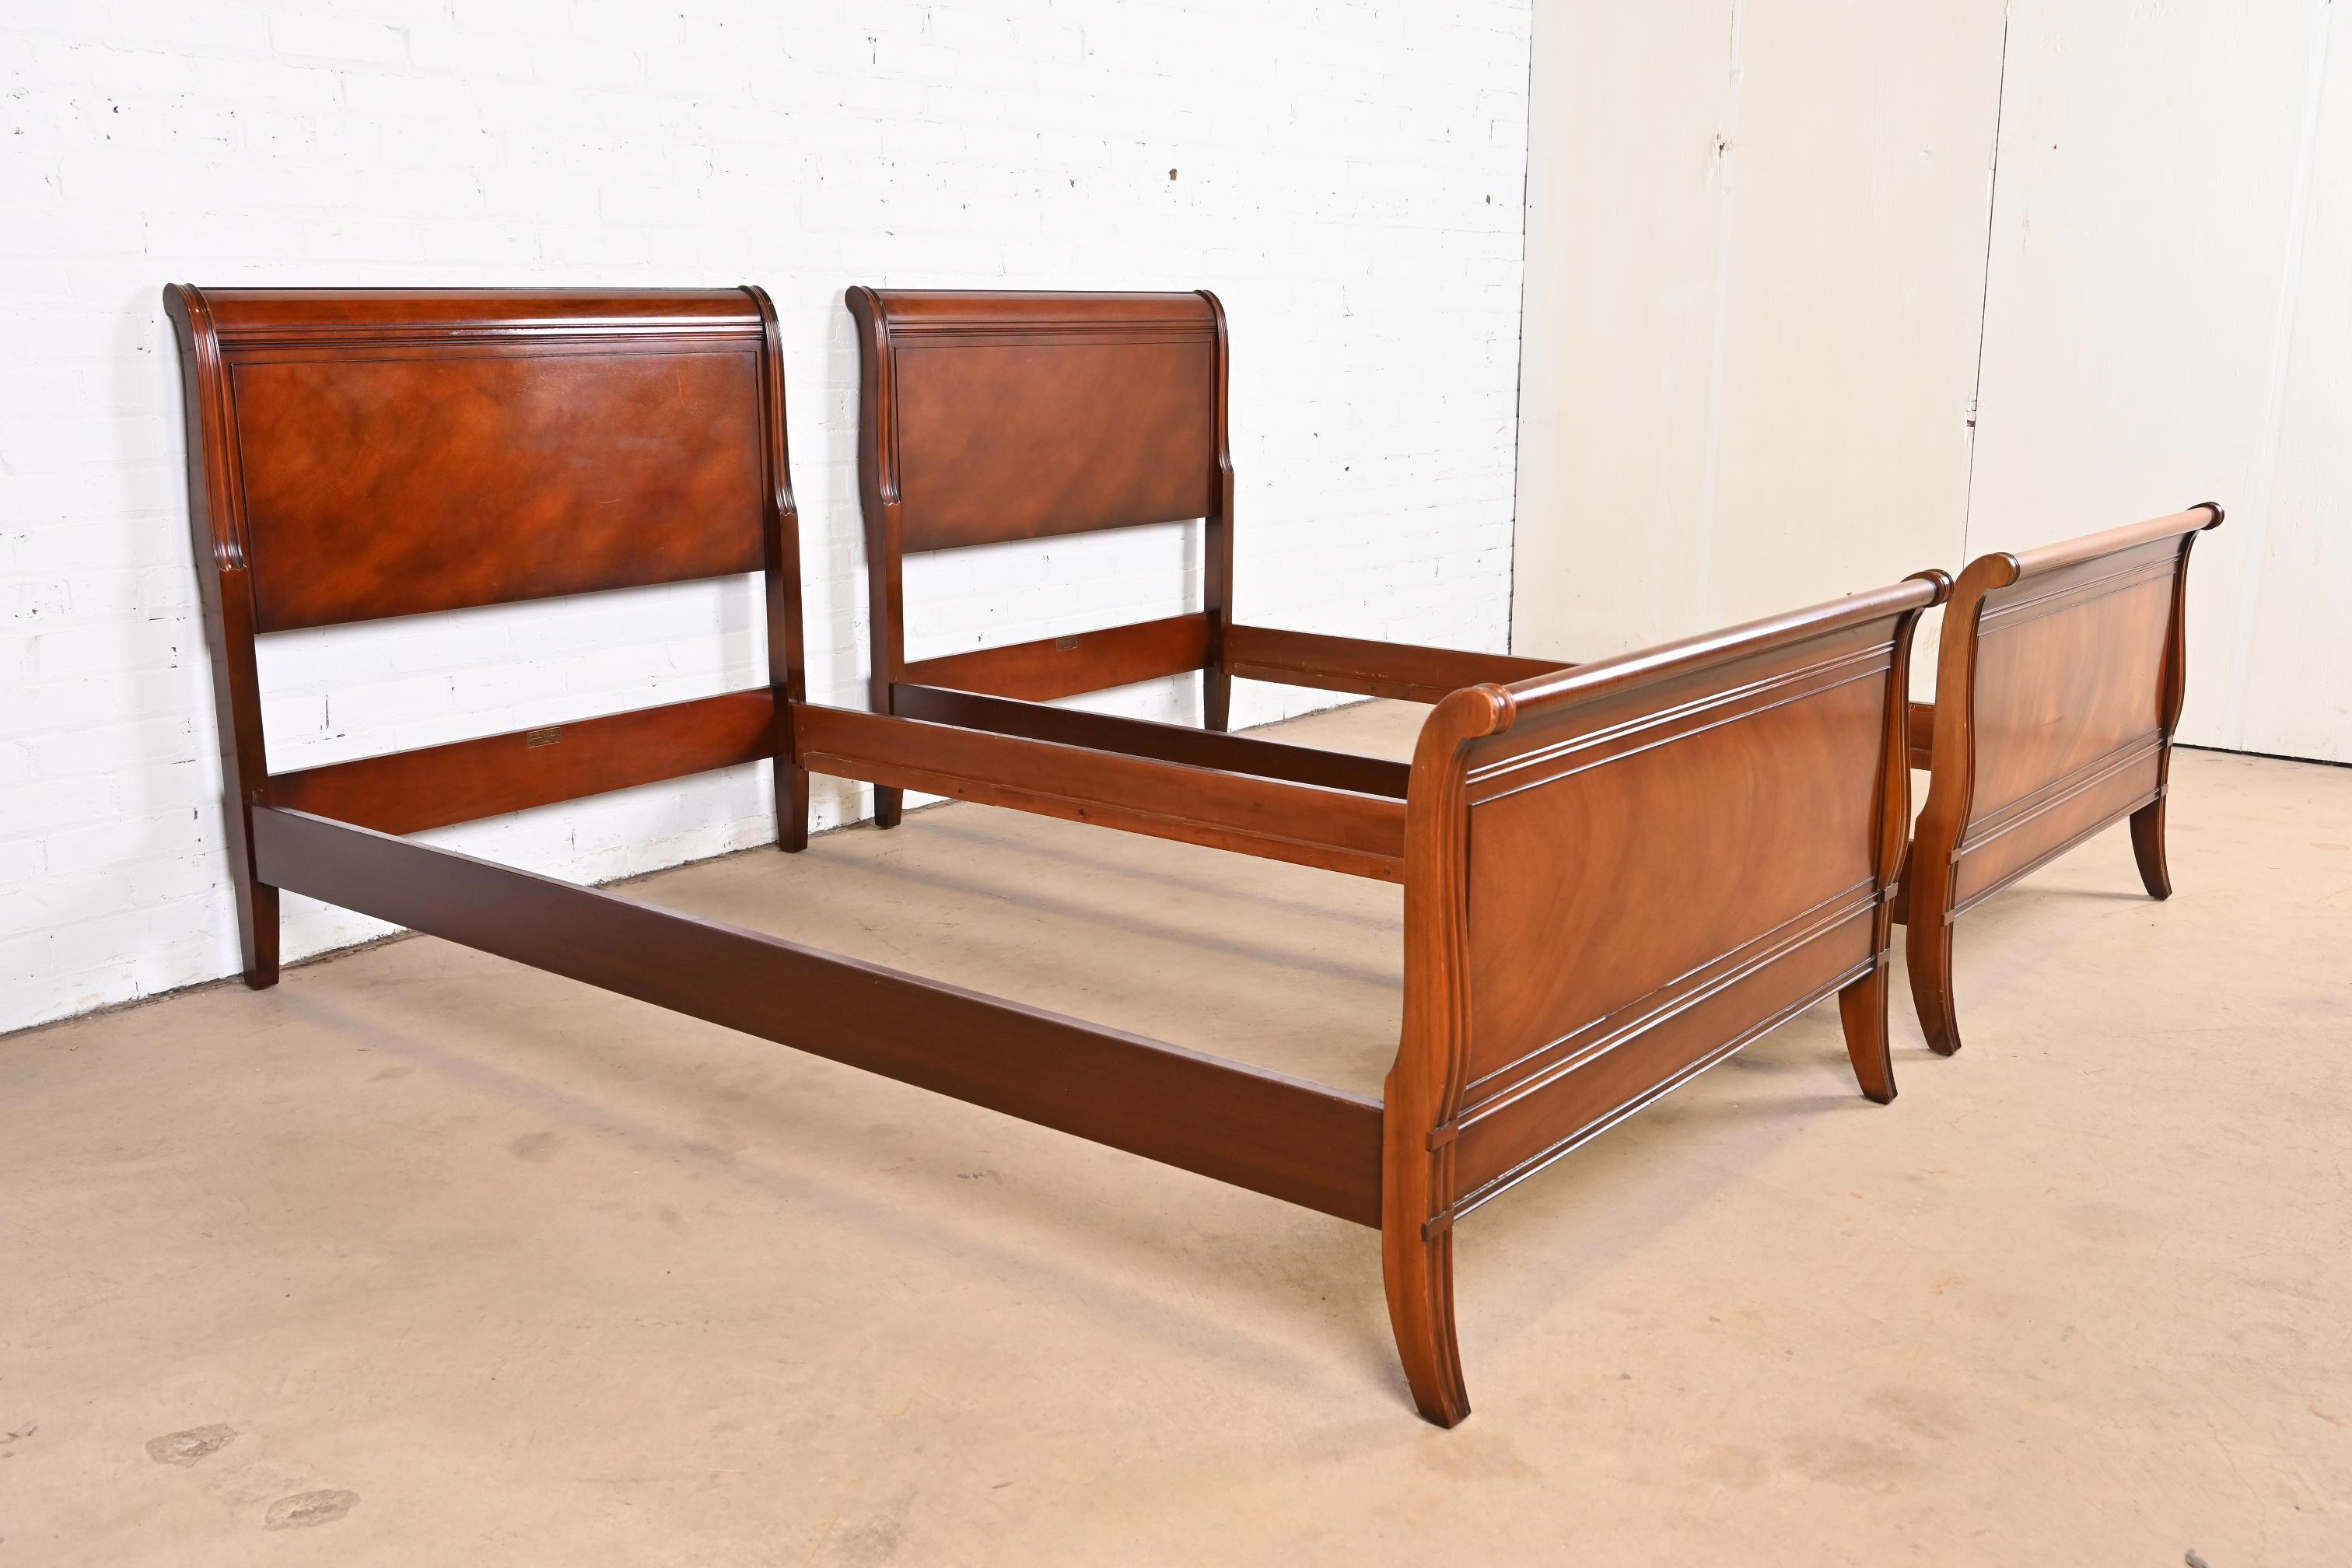 Regency Carved Mahogany Twin Size Sleigh Beds by Fallon & Hellen, circa 1930s 1